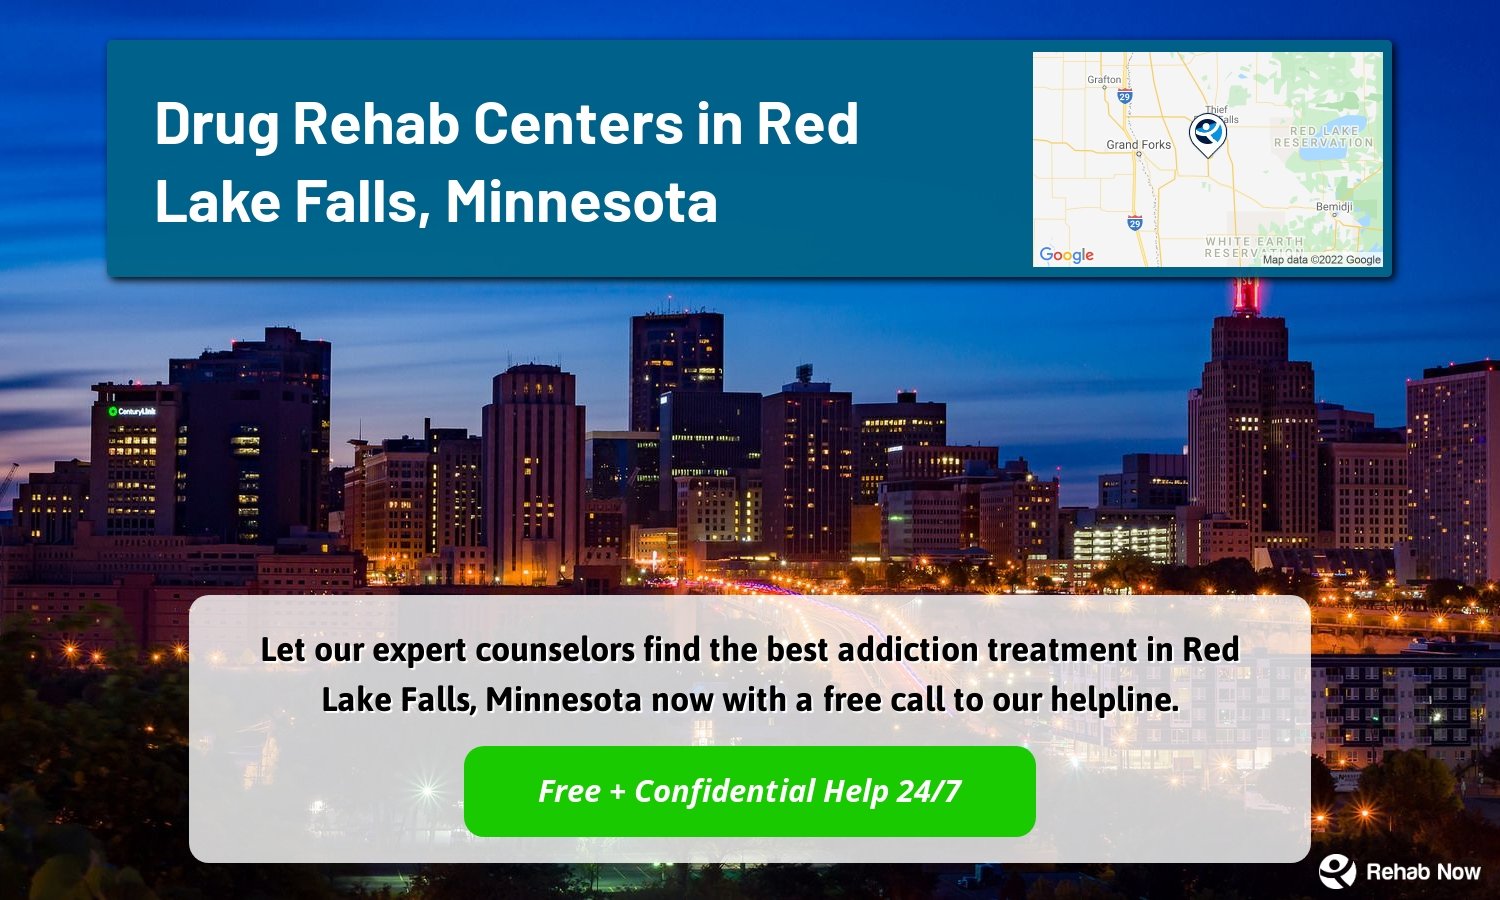 Let our expert counselors find the best addiction treatment in Red Lake Falls, Minnesota now with a free call to our helpline.